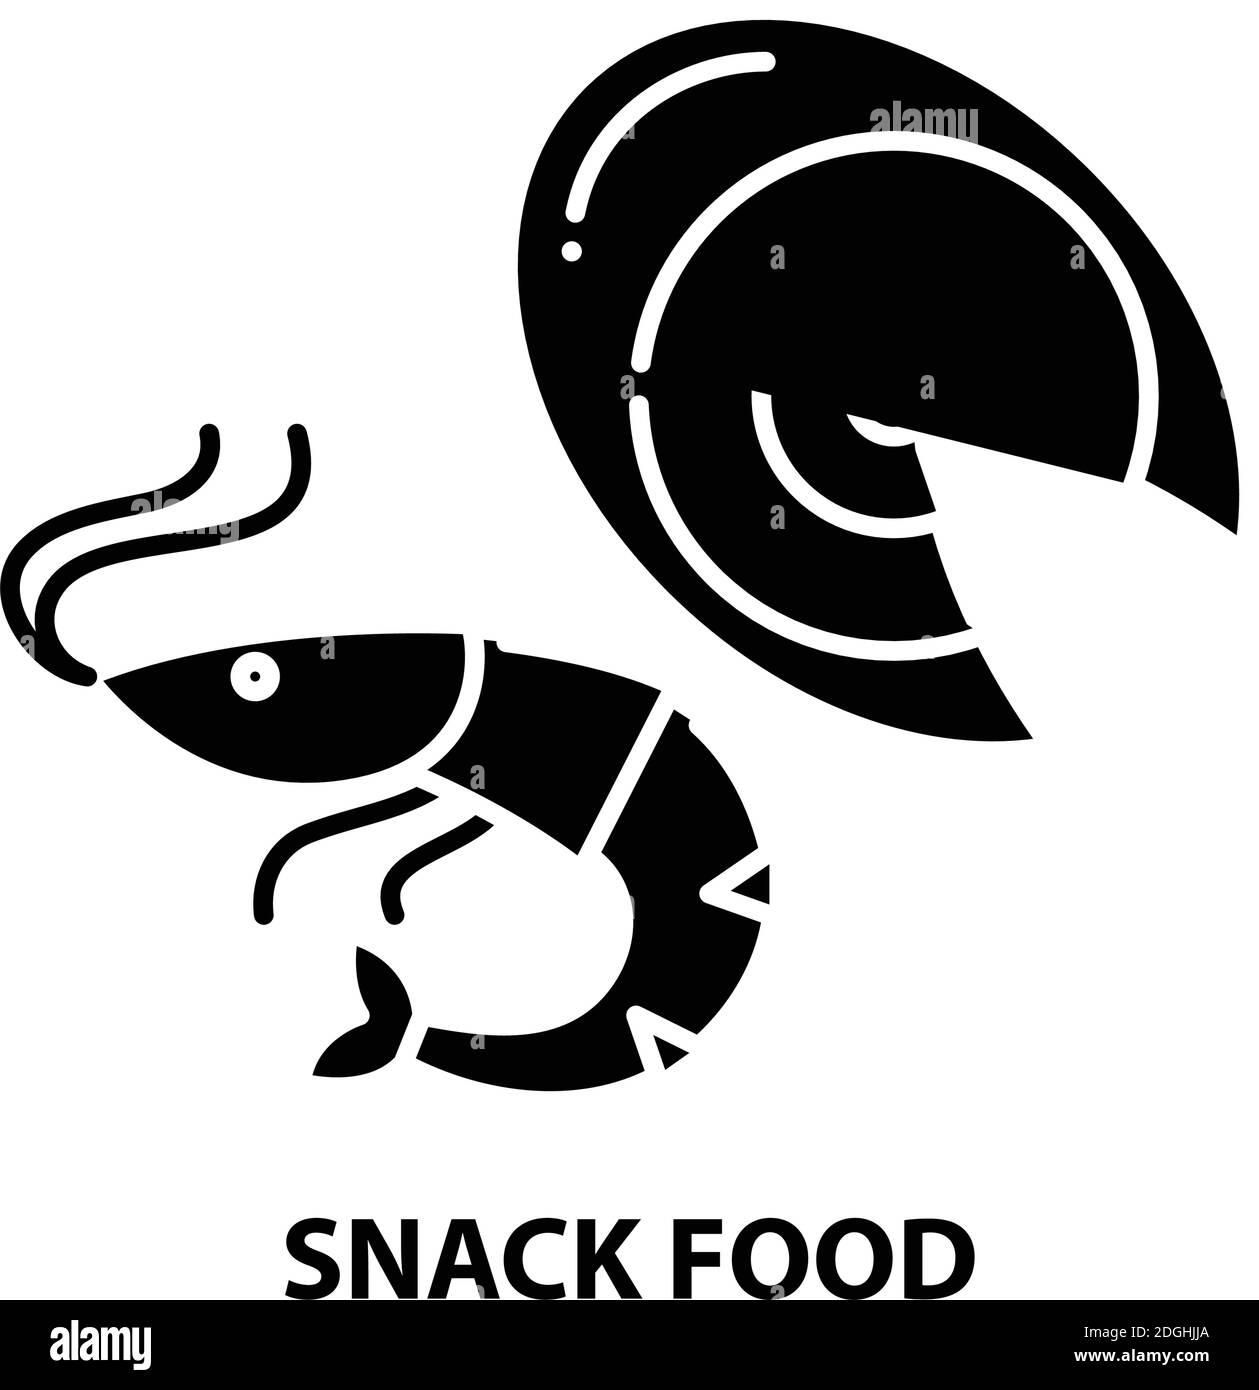 snack food icon, black vector sign with editable strokes, concept illustration Stock Vector